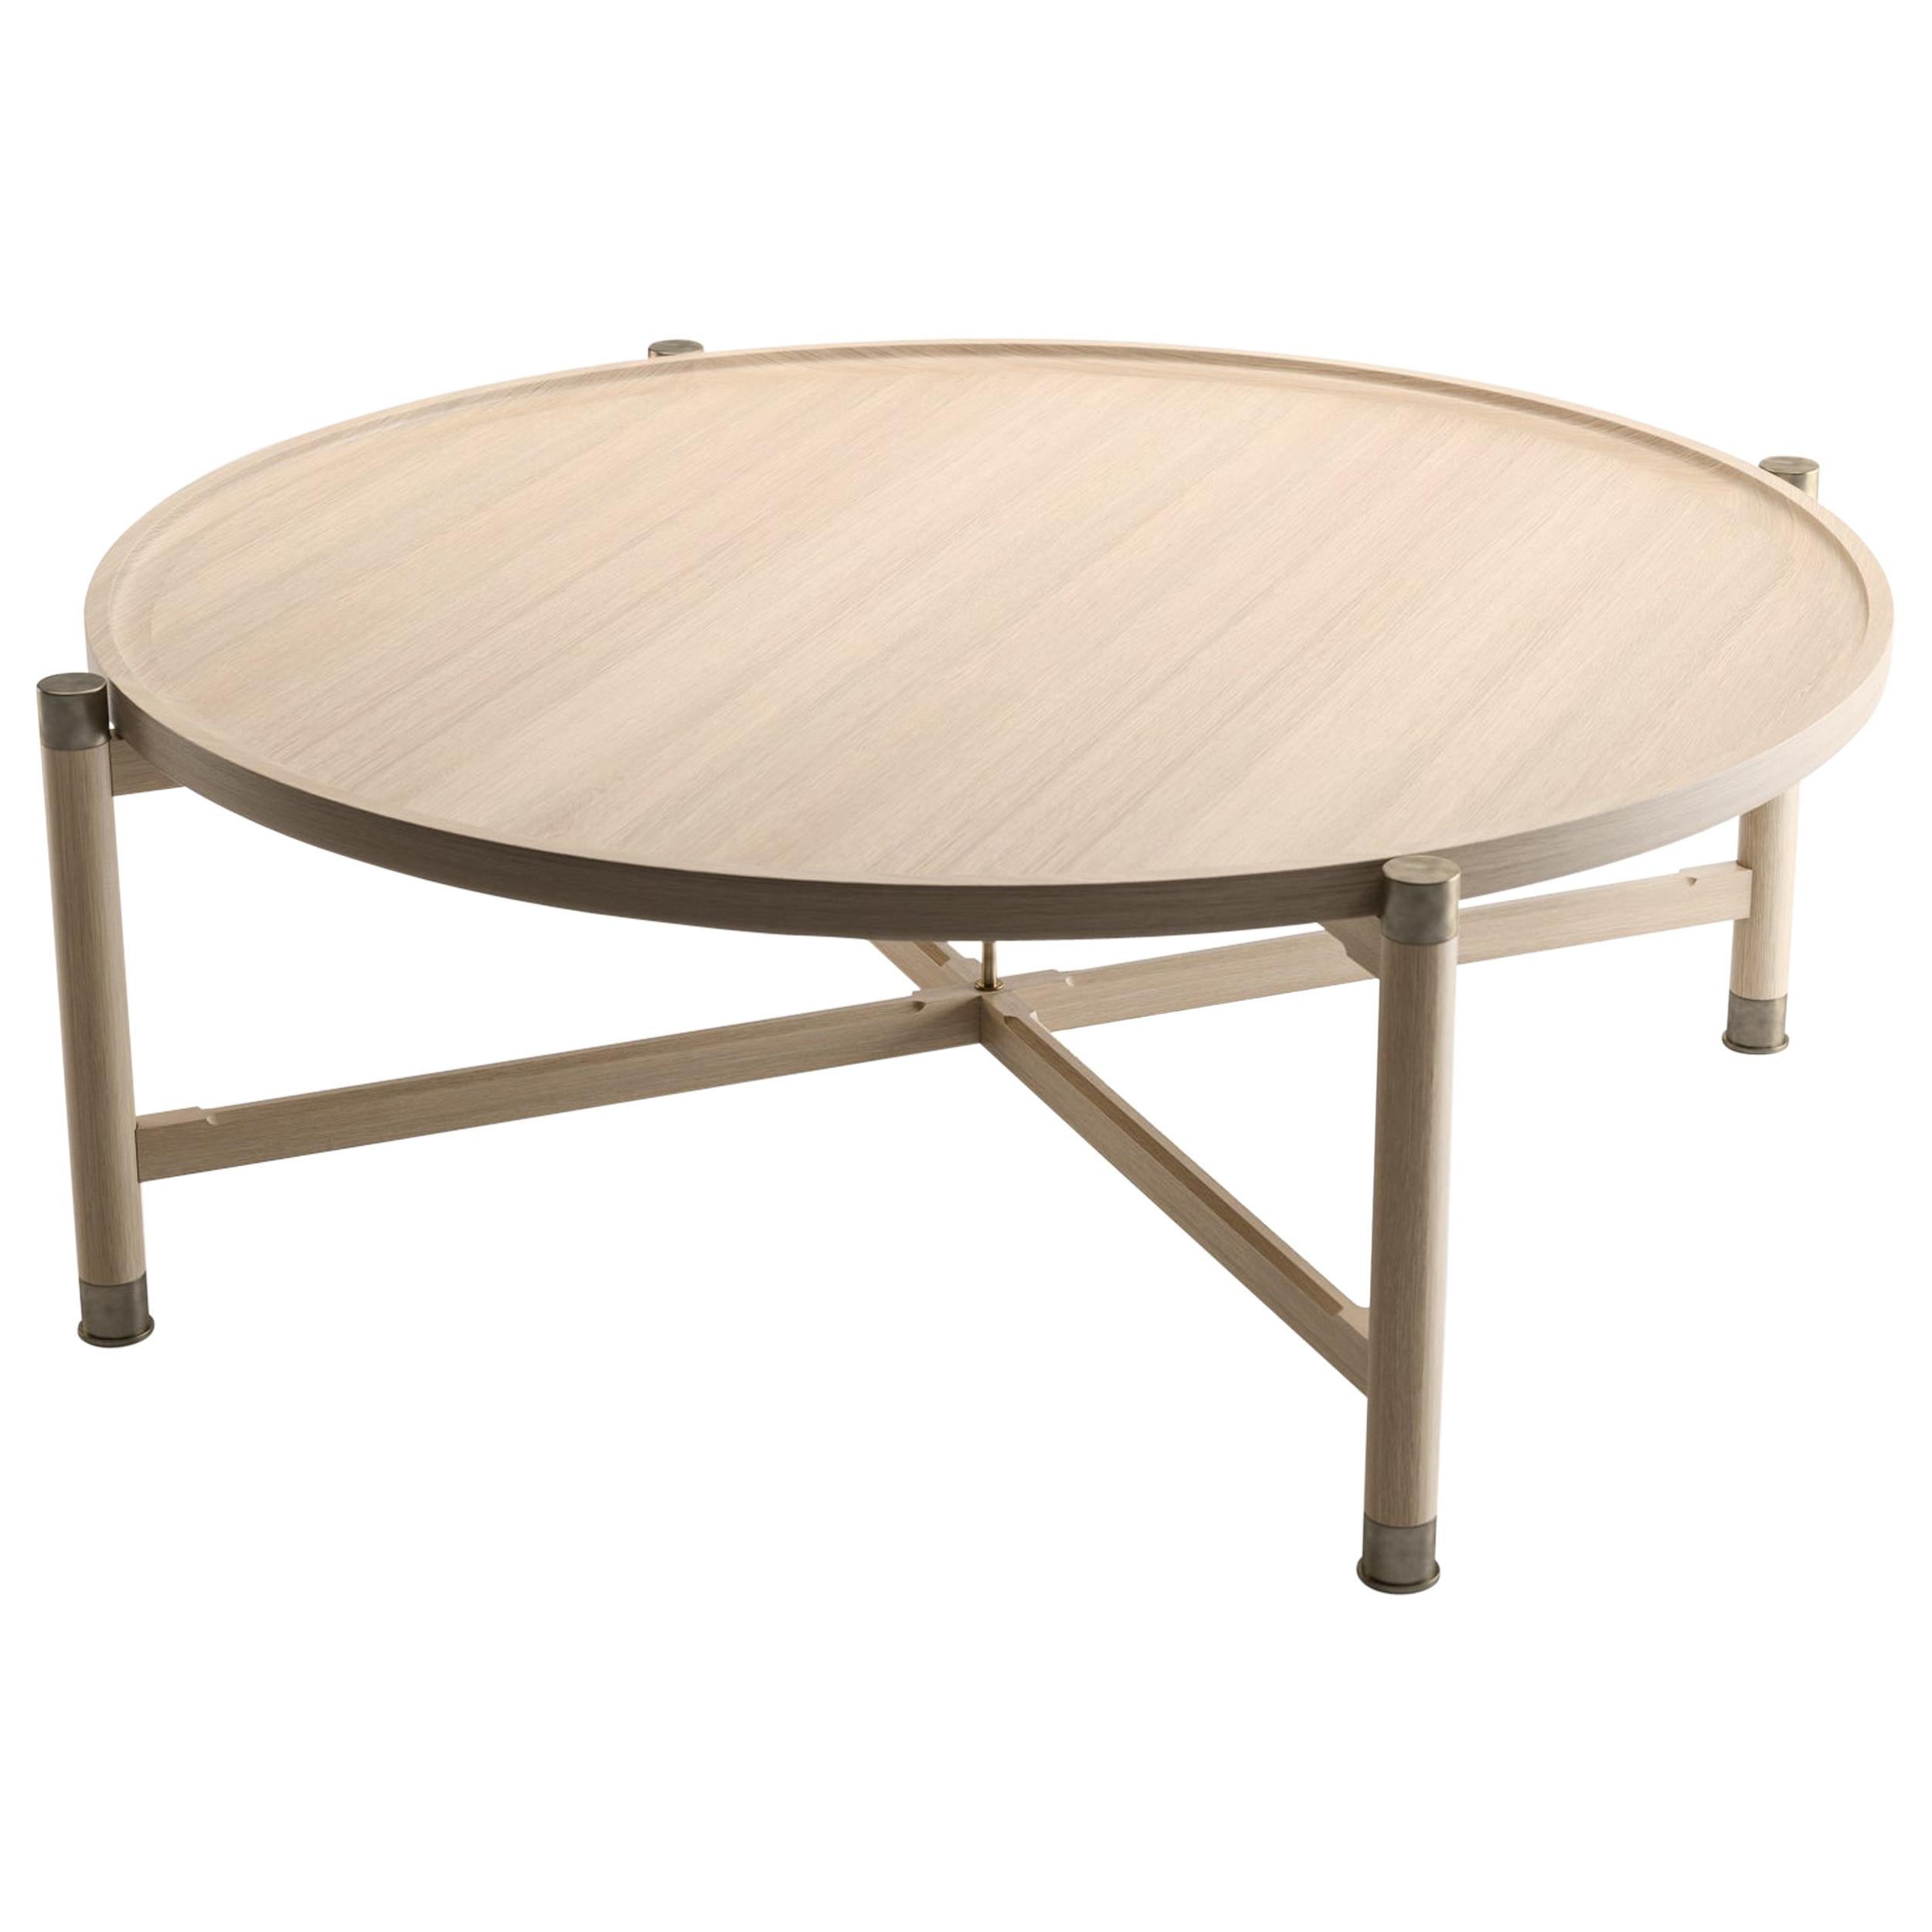 Otto Round Coffee Table in Bleached Oak with Antique Brass Fittings and Stem For Sale